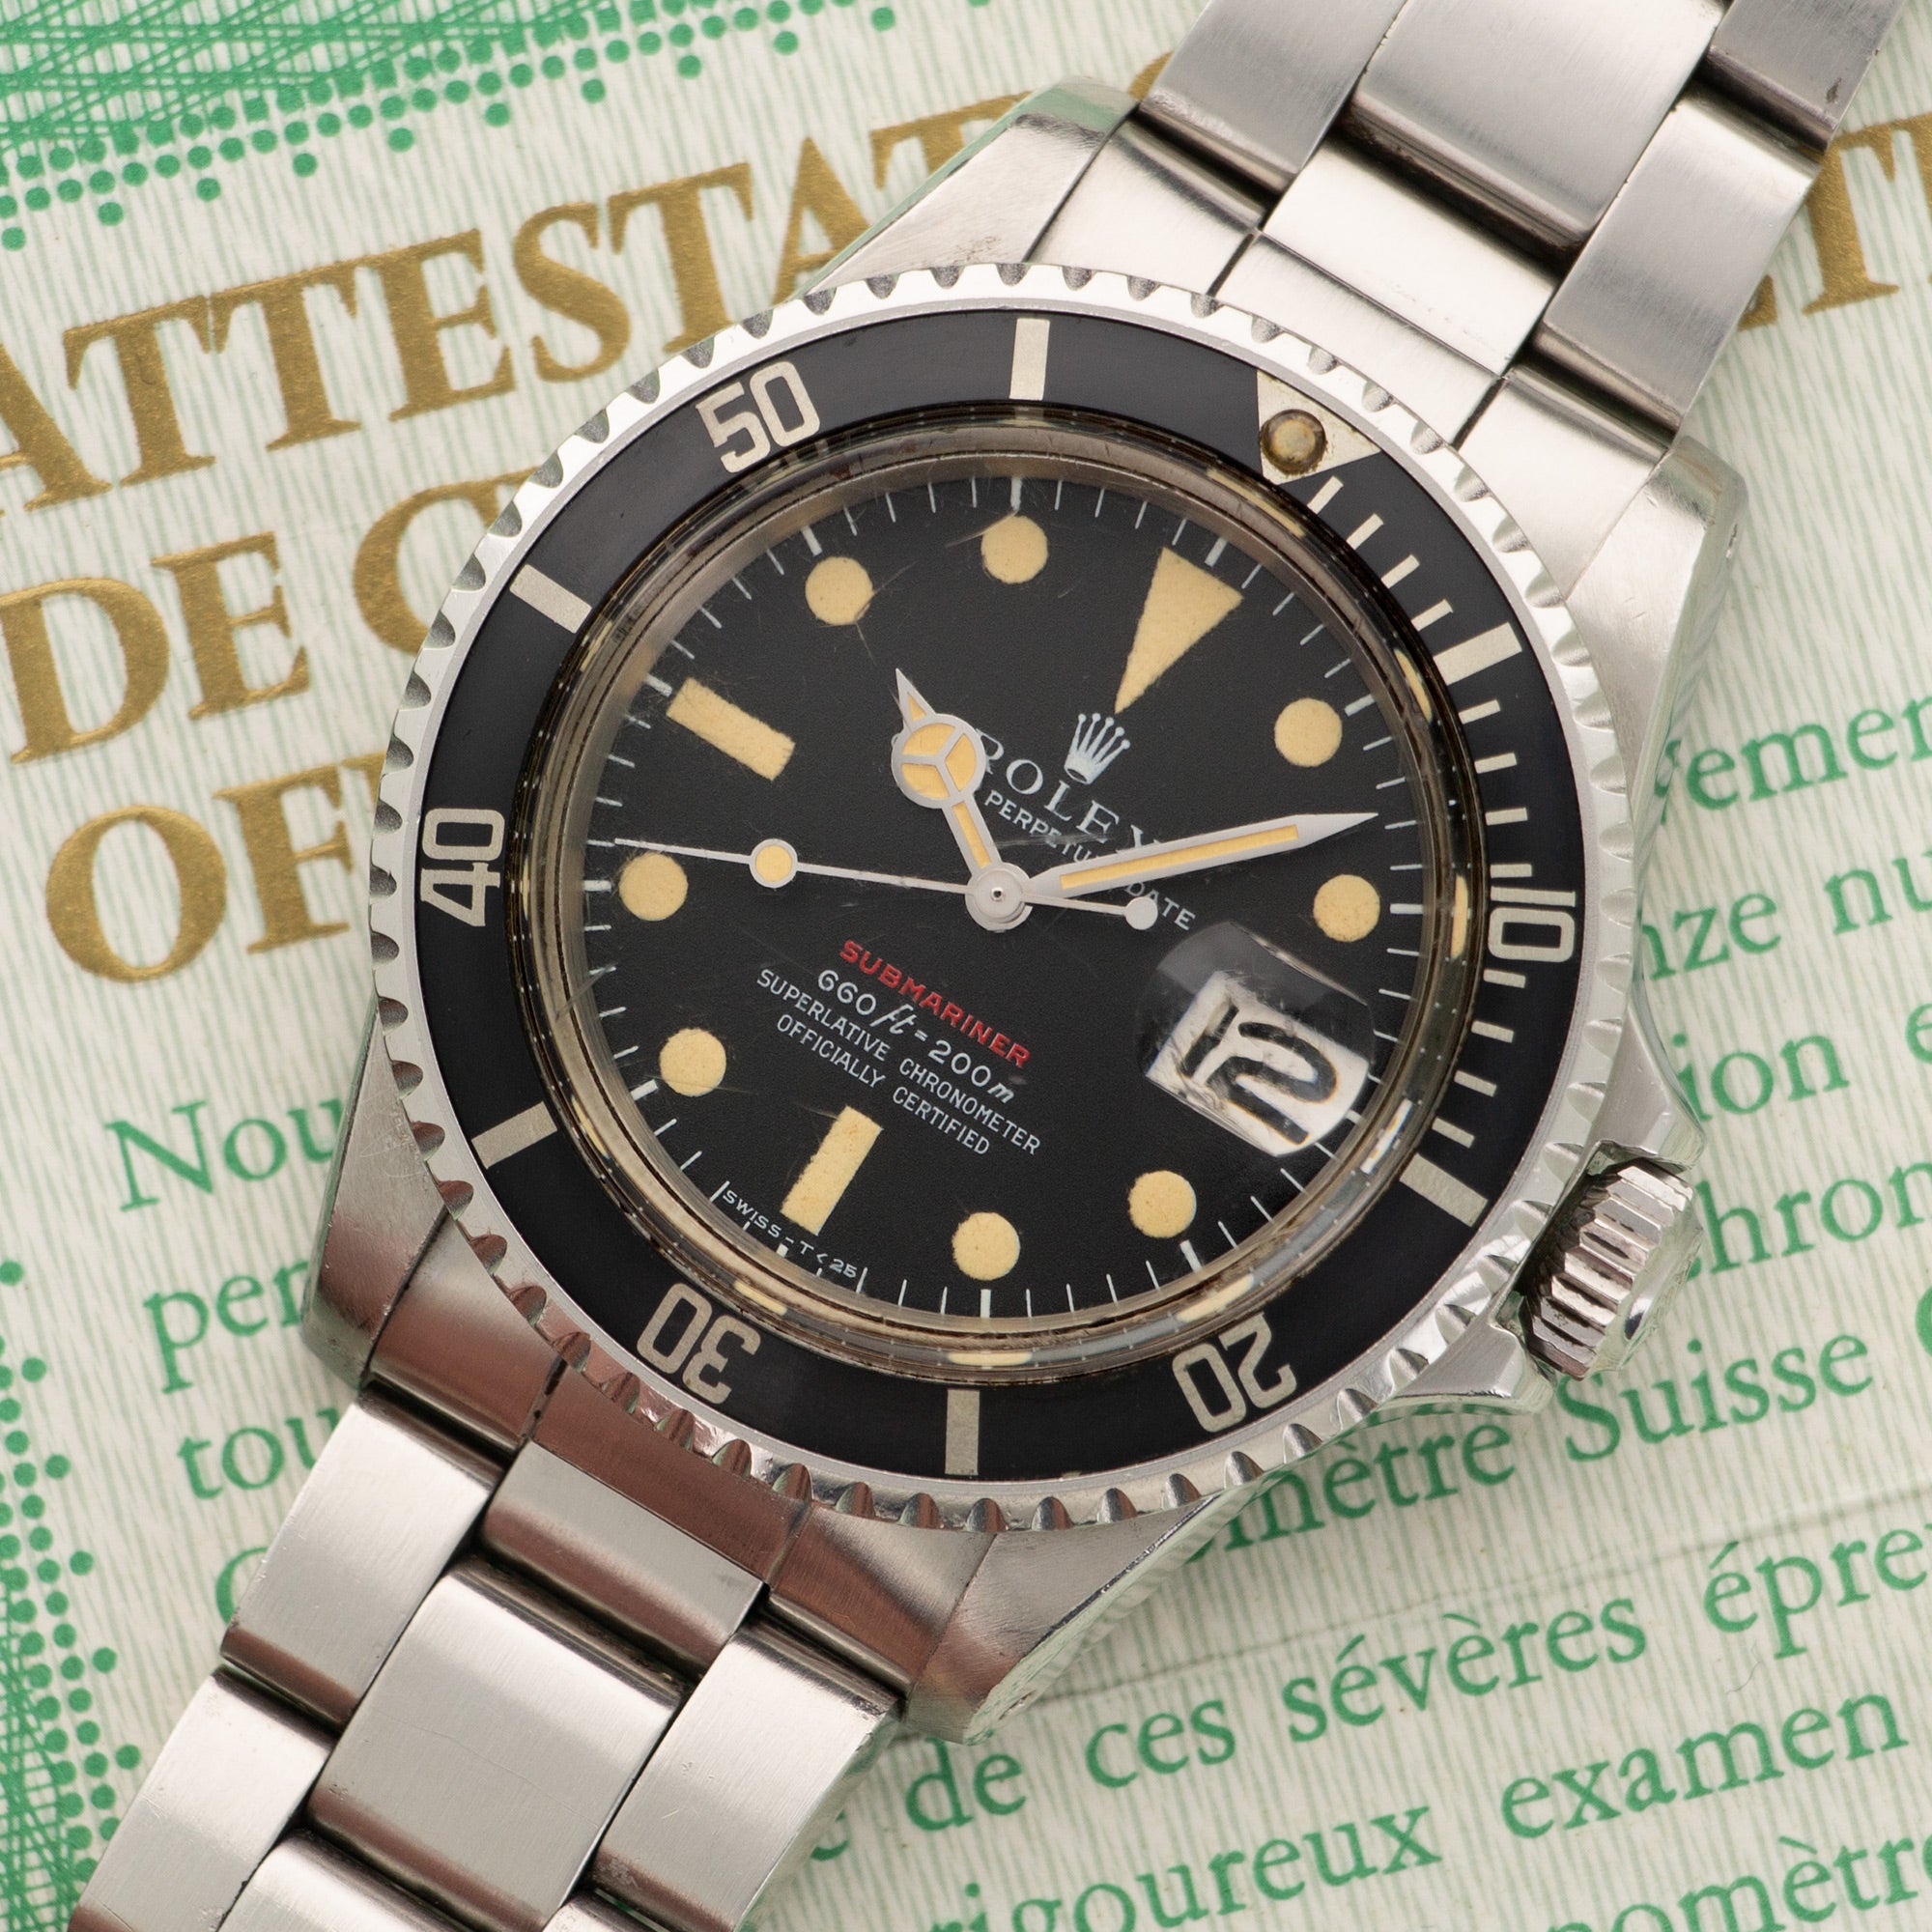 Rolex - Rolex Red Submariner Watch Ref. 1680 with Original Warranty Paper and Hang Tag - The Keystone Watches